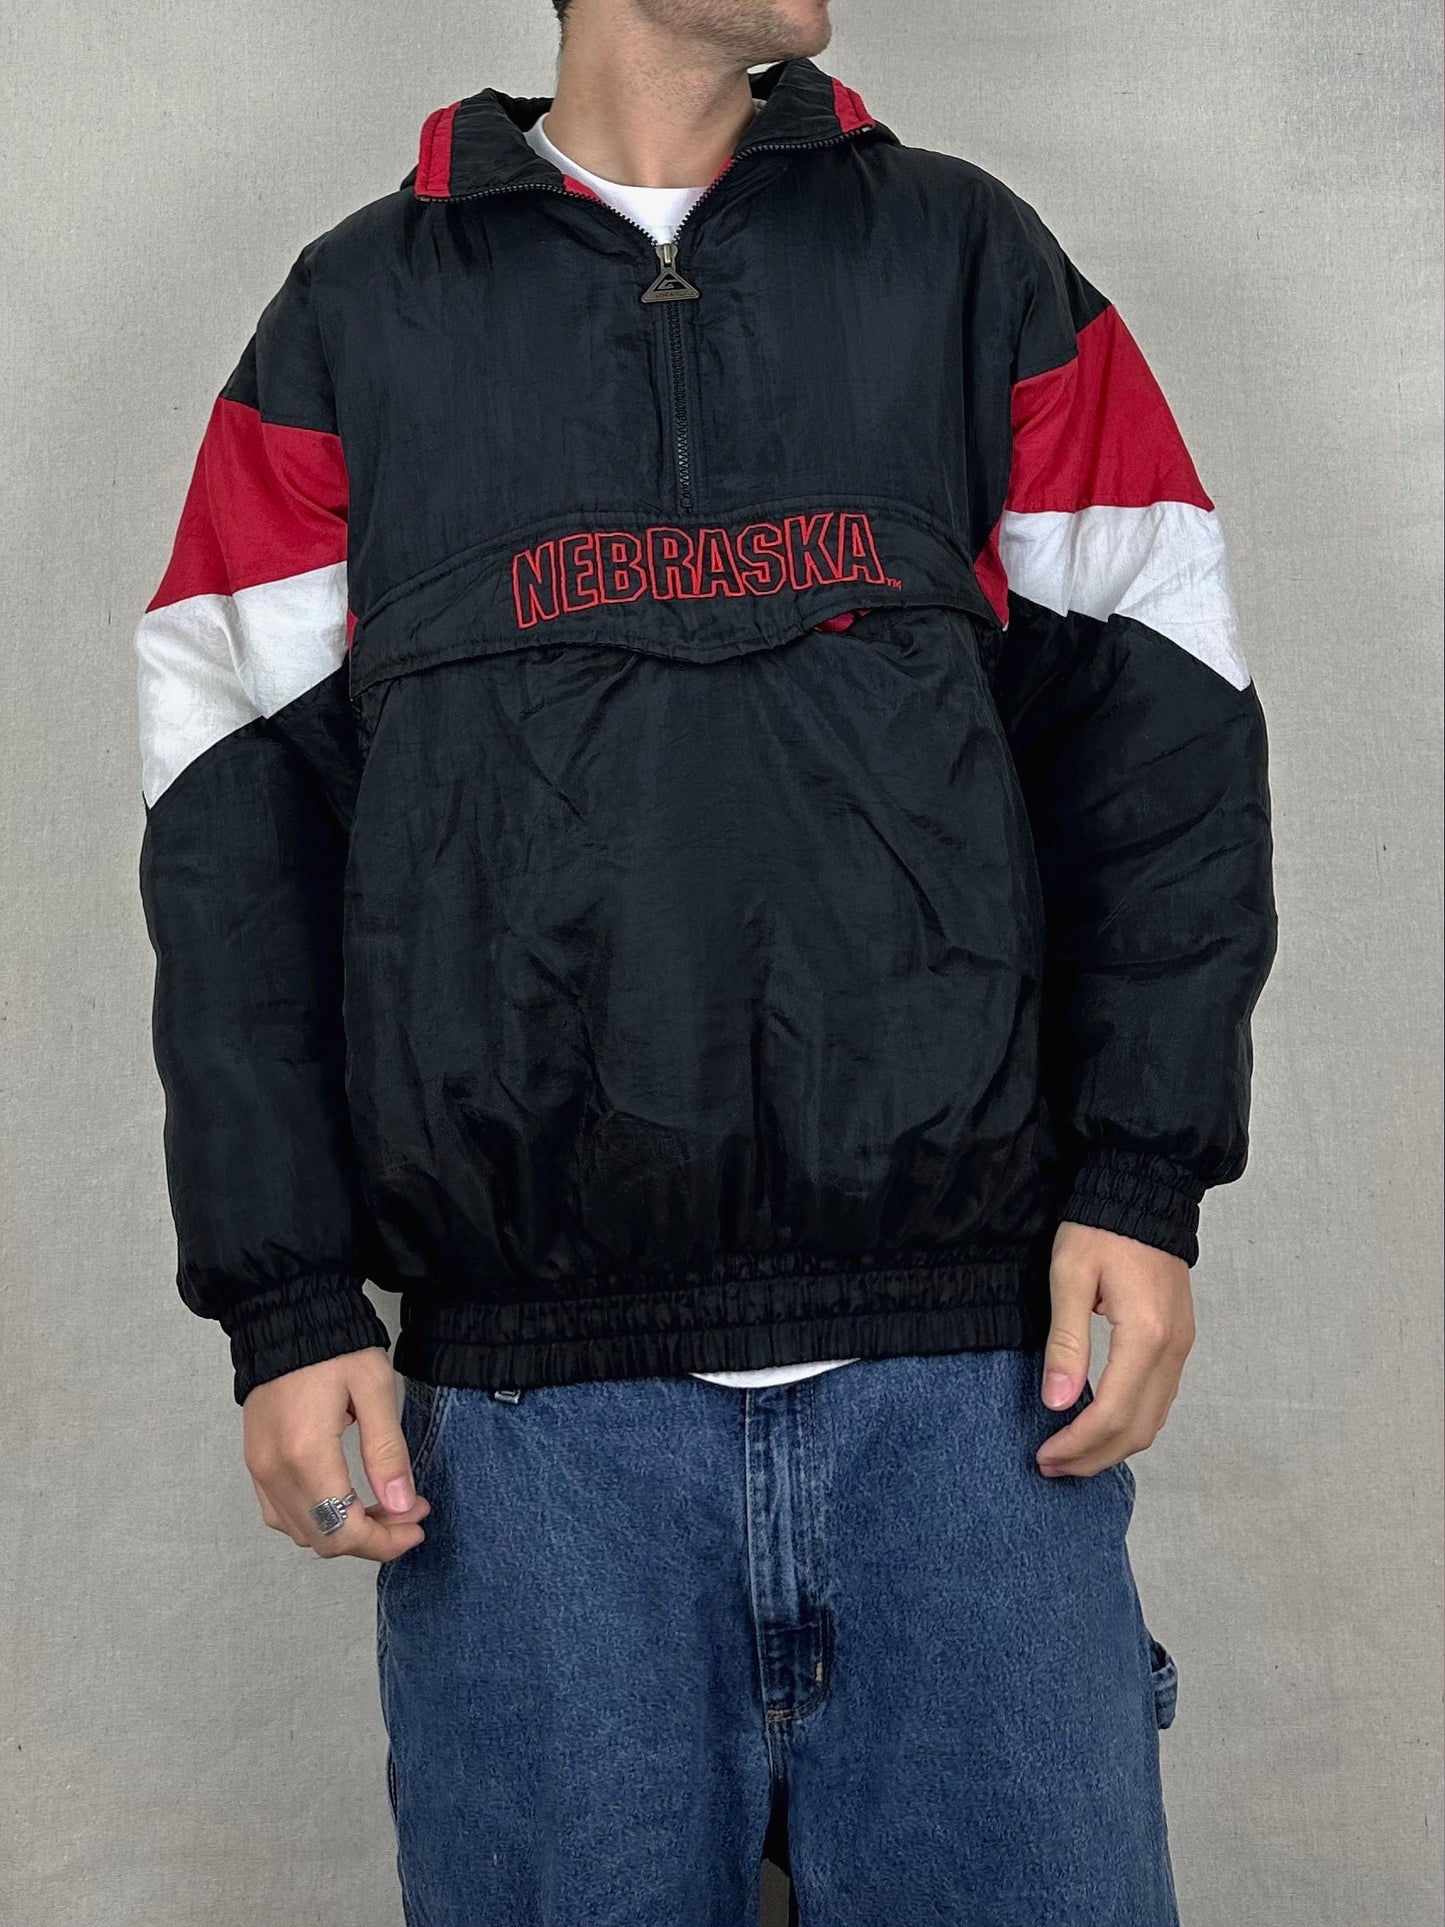 90's Nebraska Huskers Embroidered Vintage Puffer Jacket with Hood Size L-XL